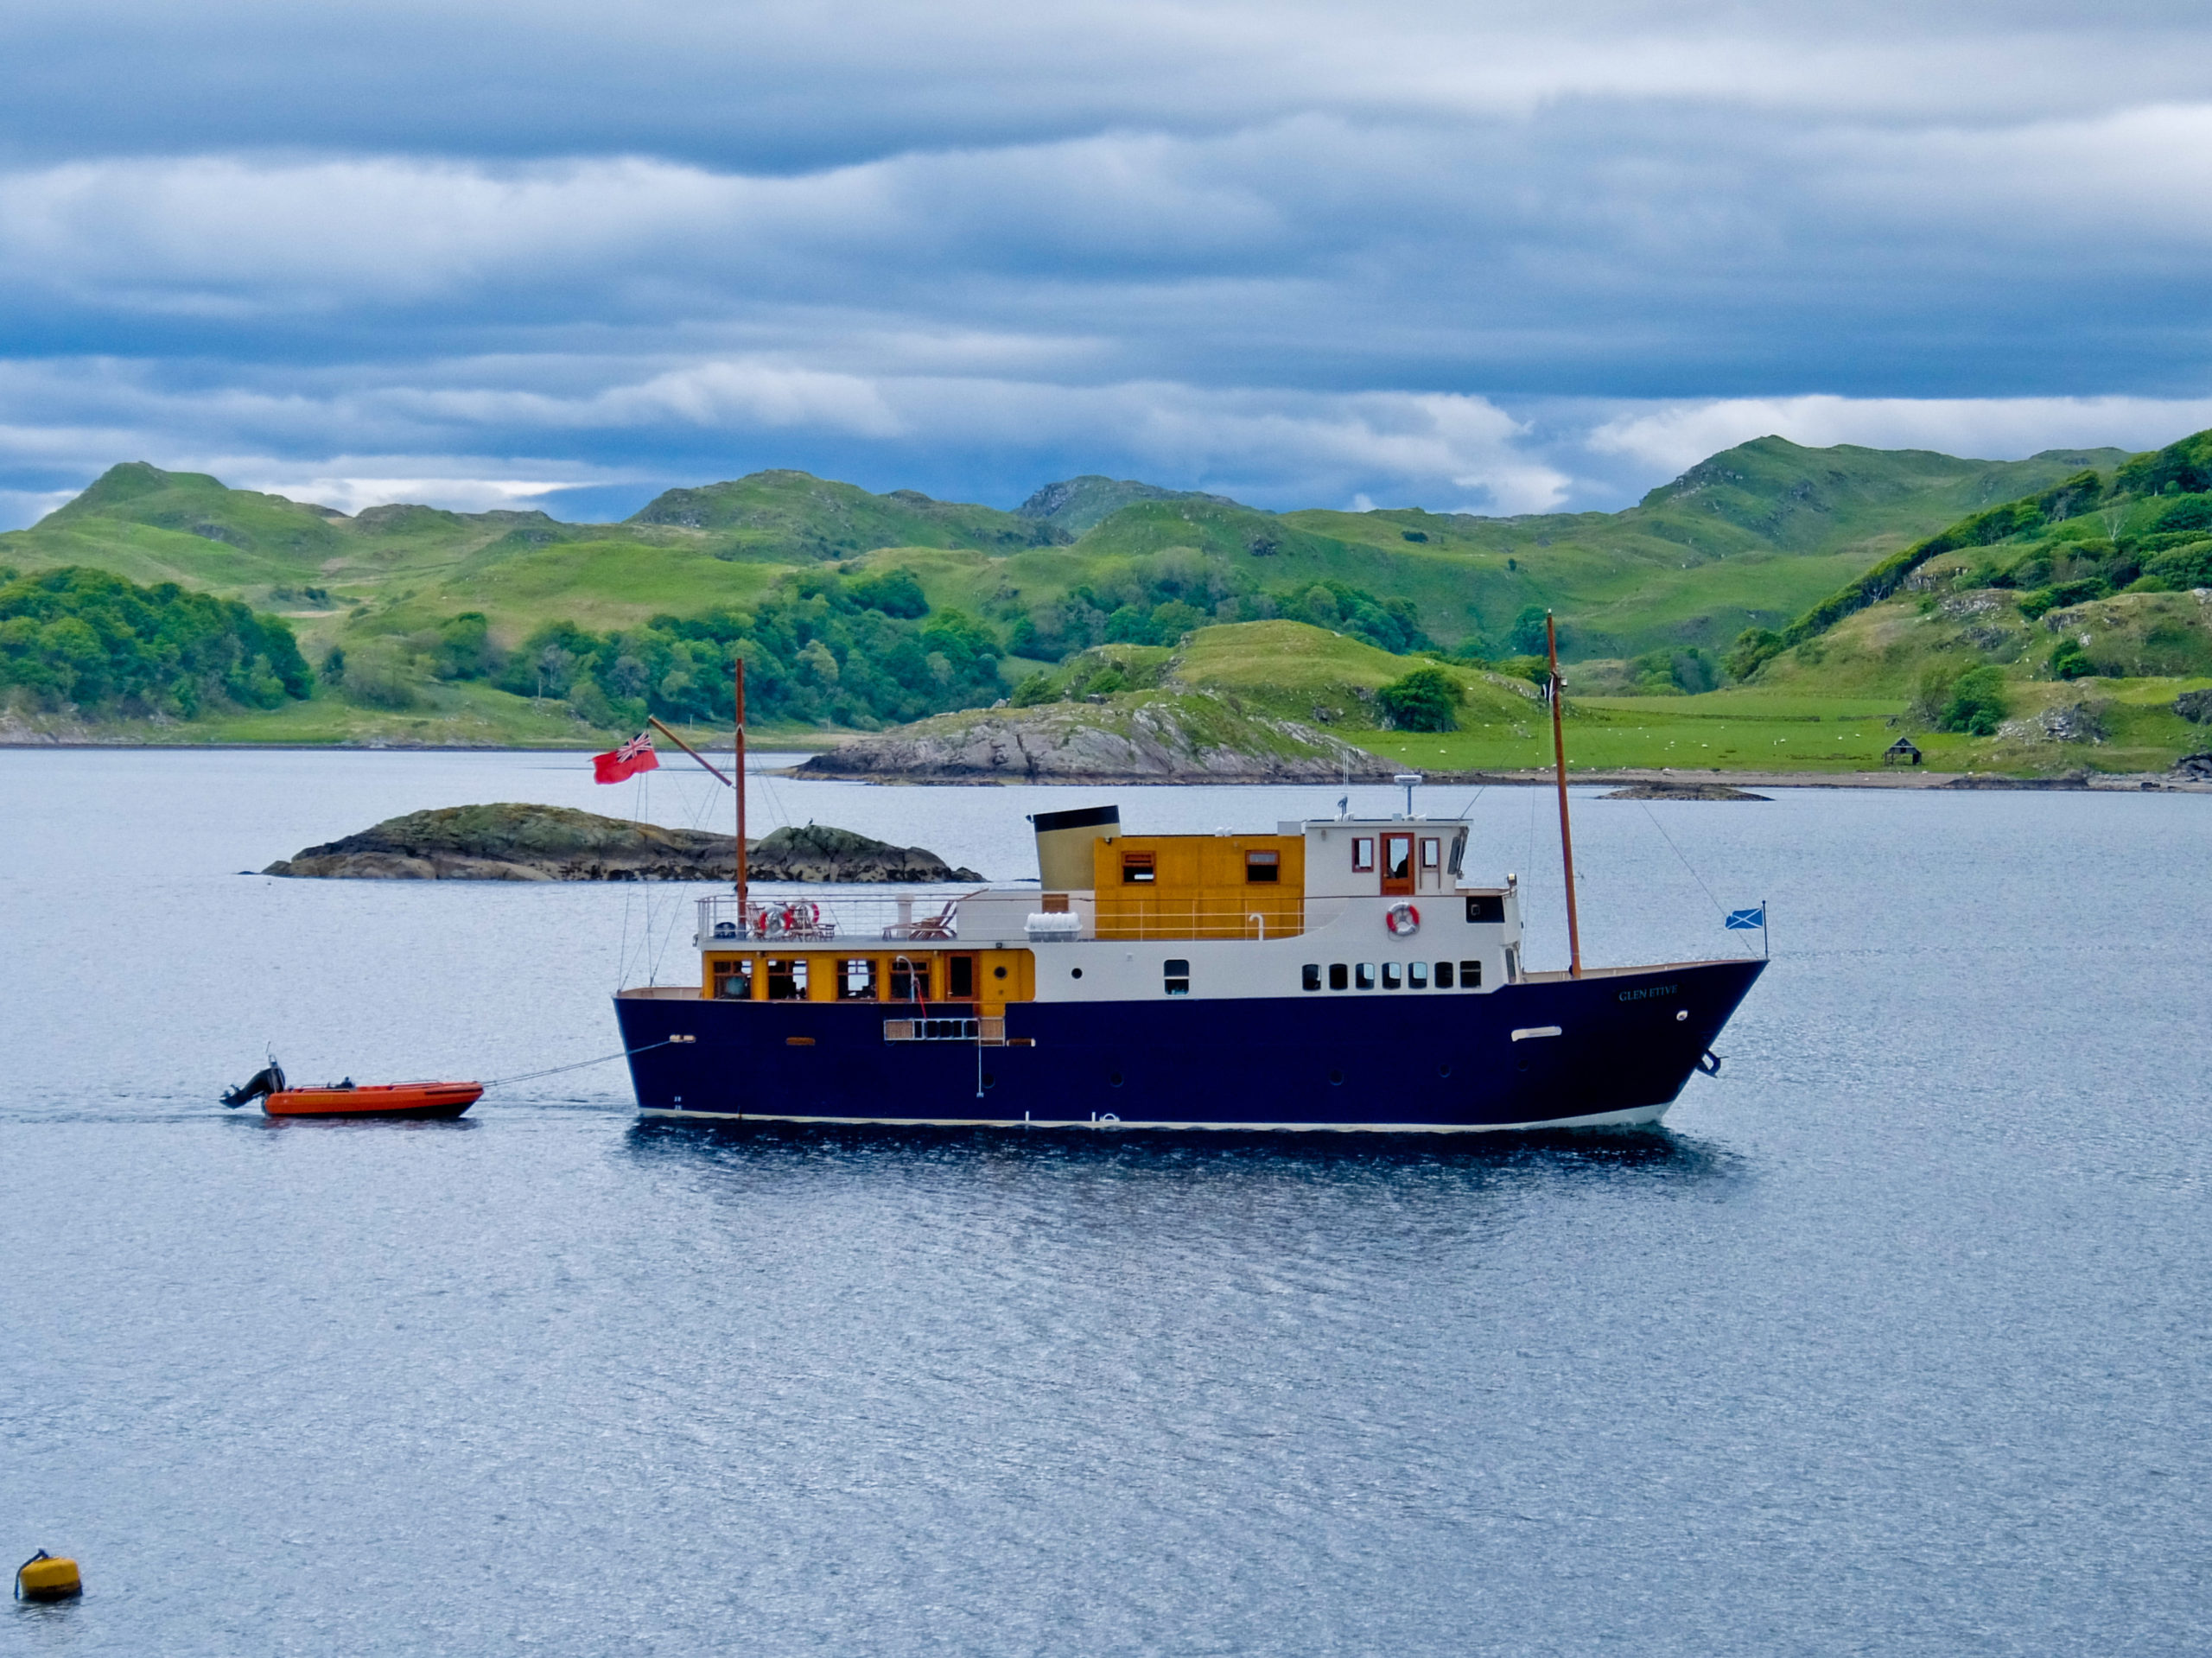 Designed especially for the Majestic Line, the MV Glen Etive was built to cruise in comfort around the Hebrides and the west coast